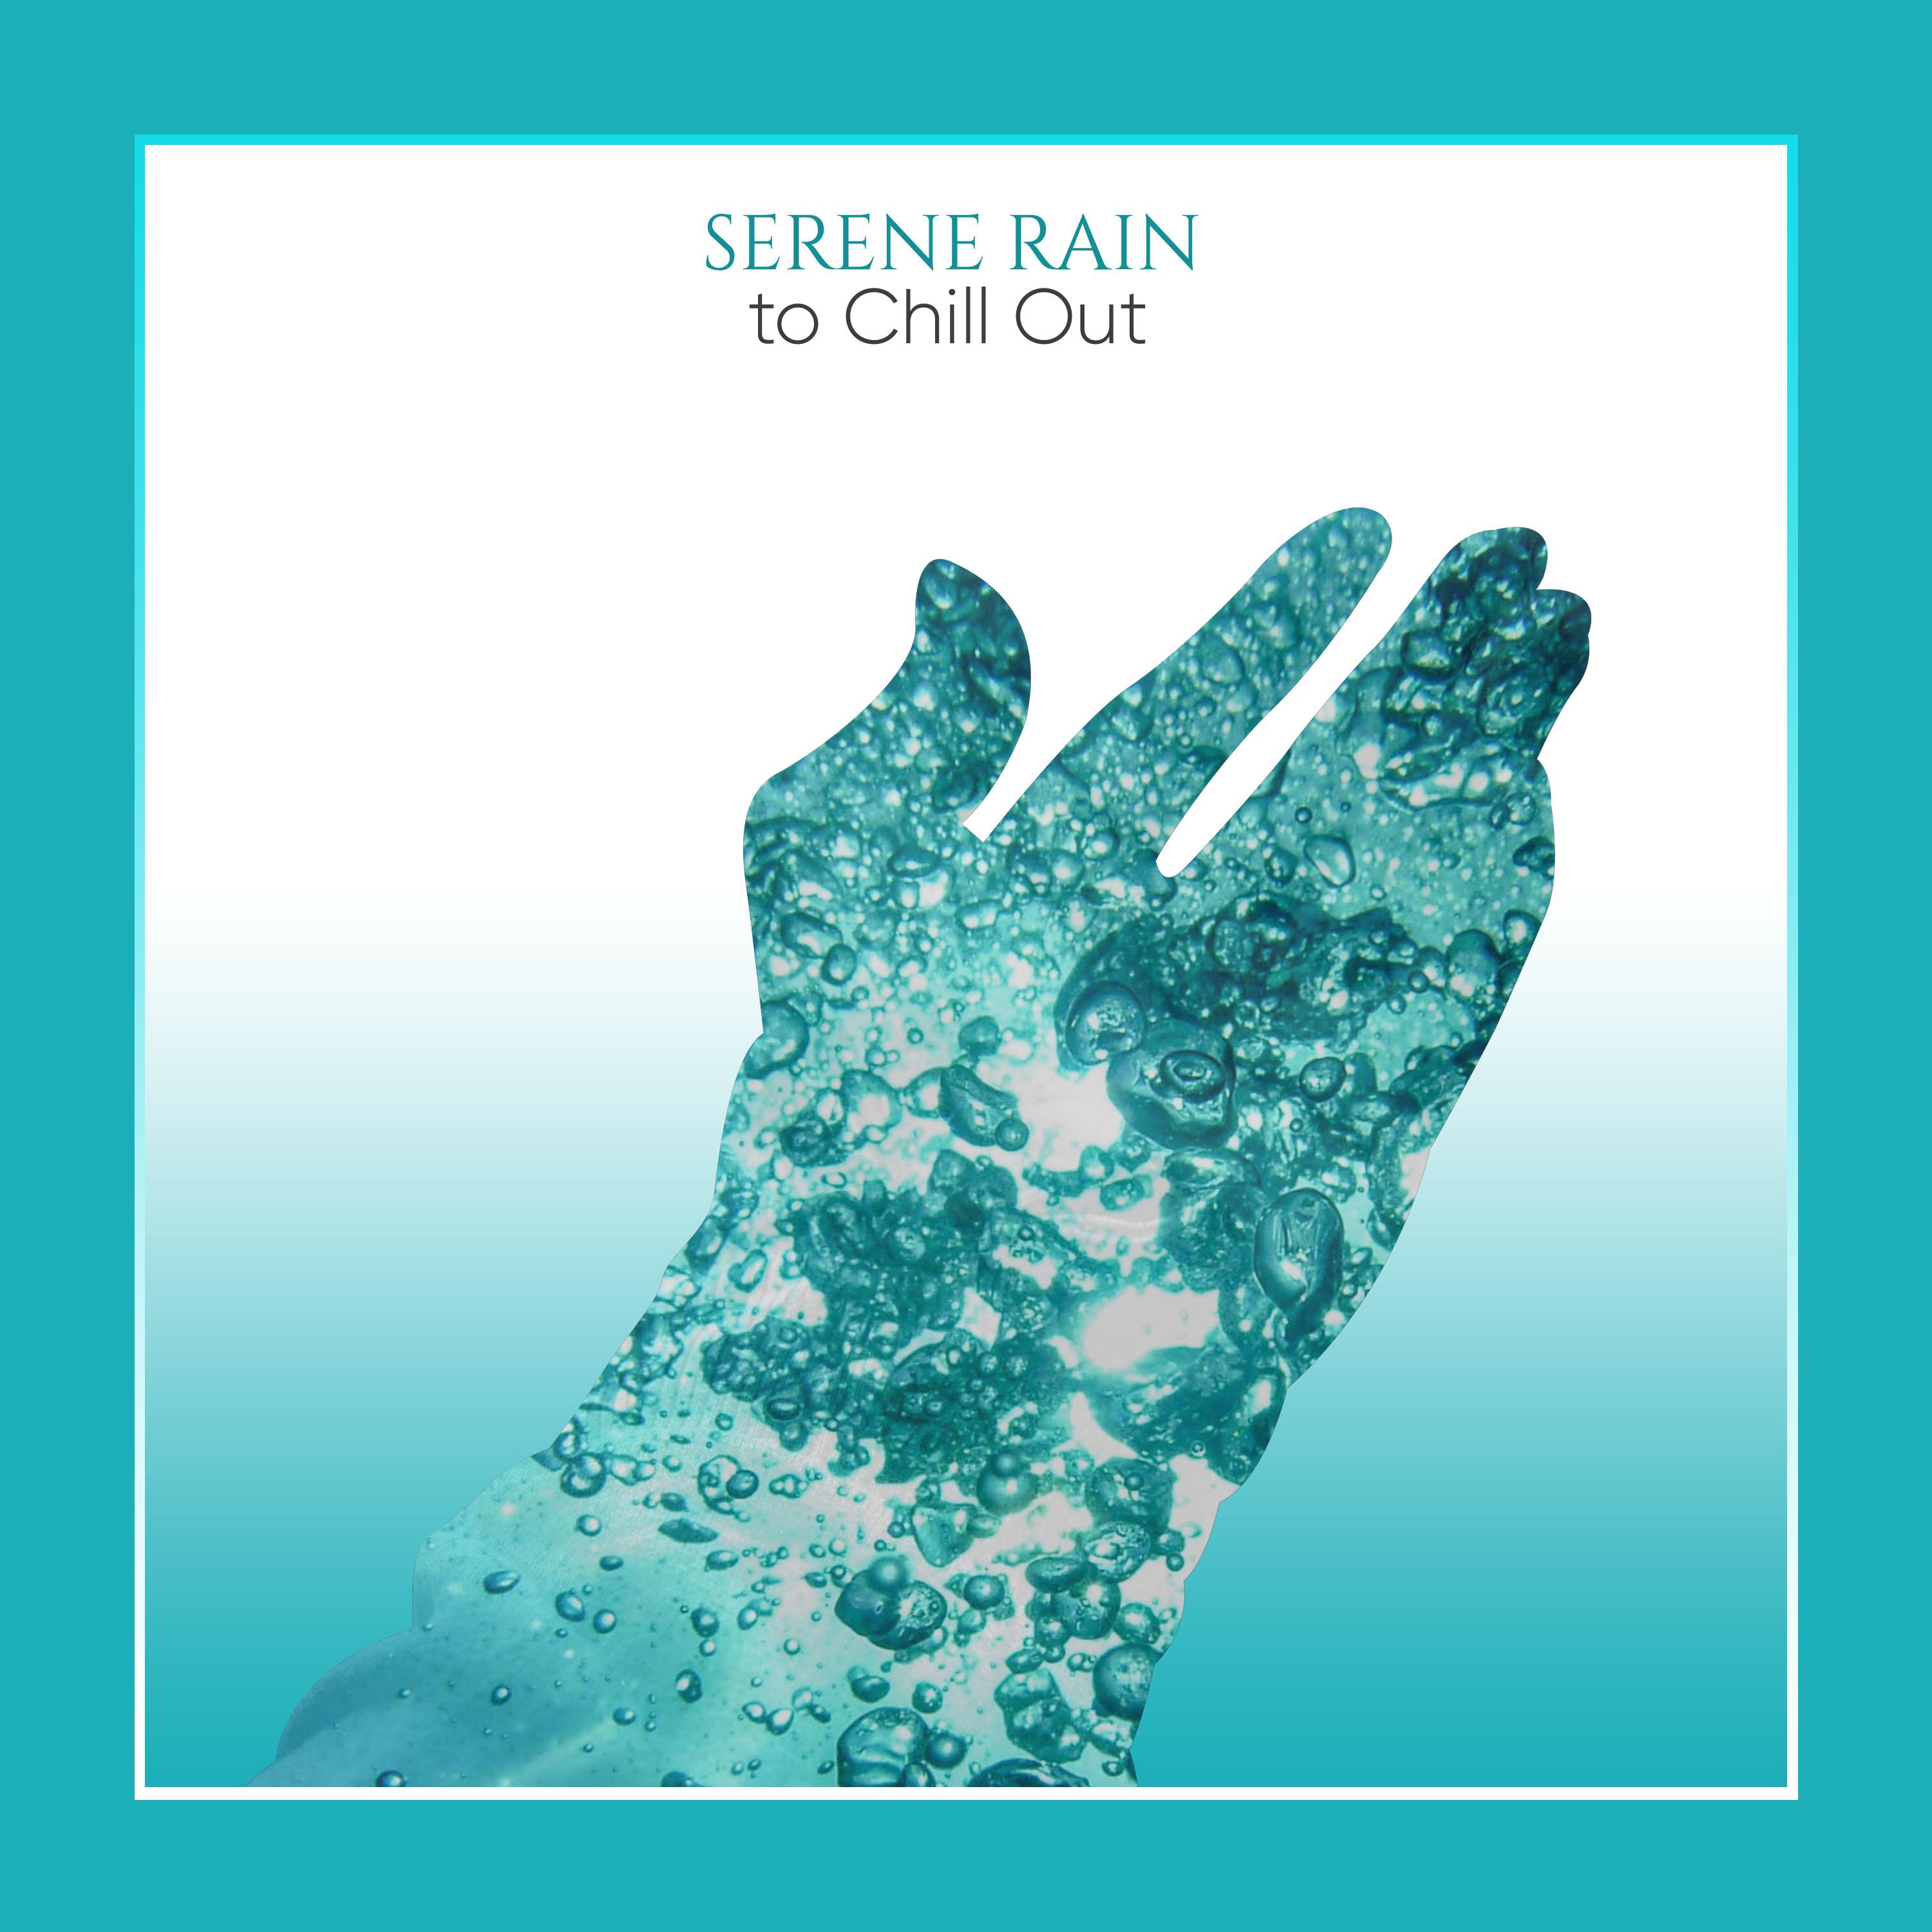 24 Serene Rain Tracks to Chill Out